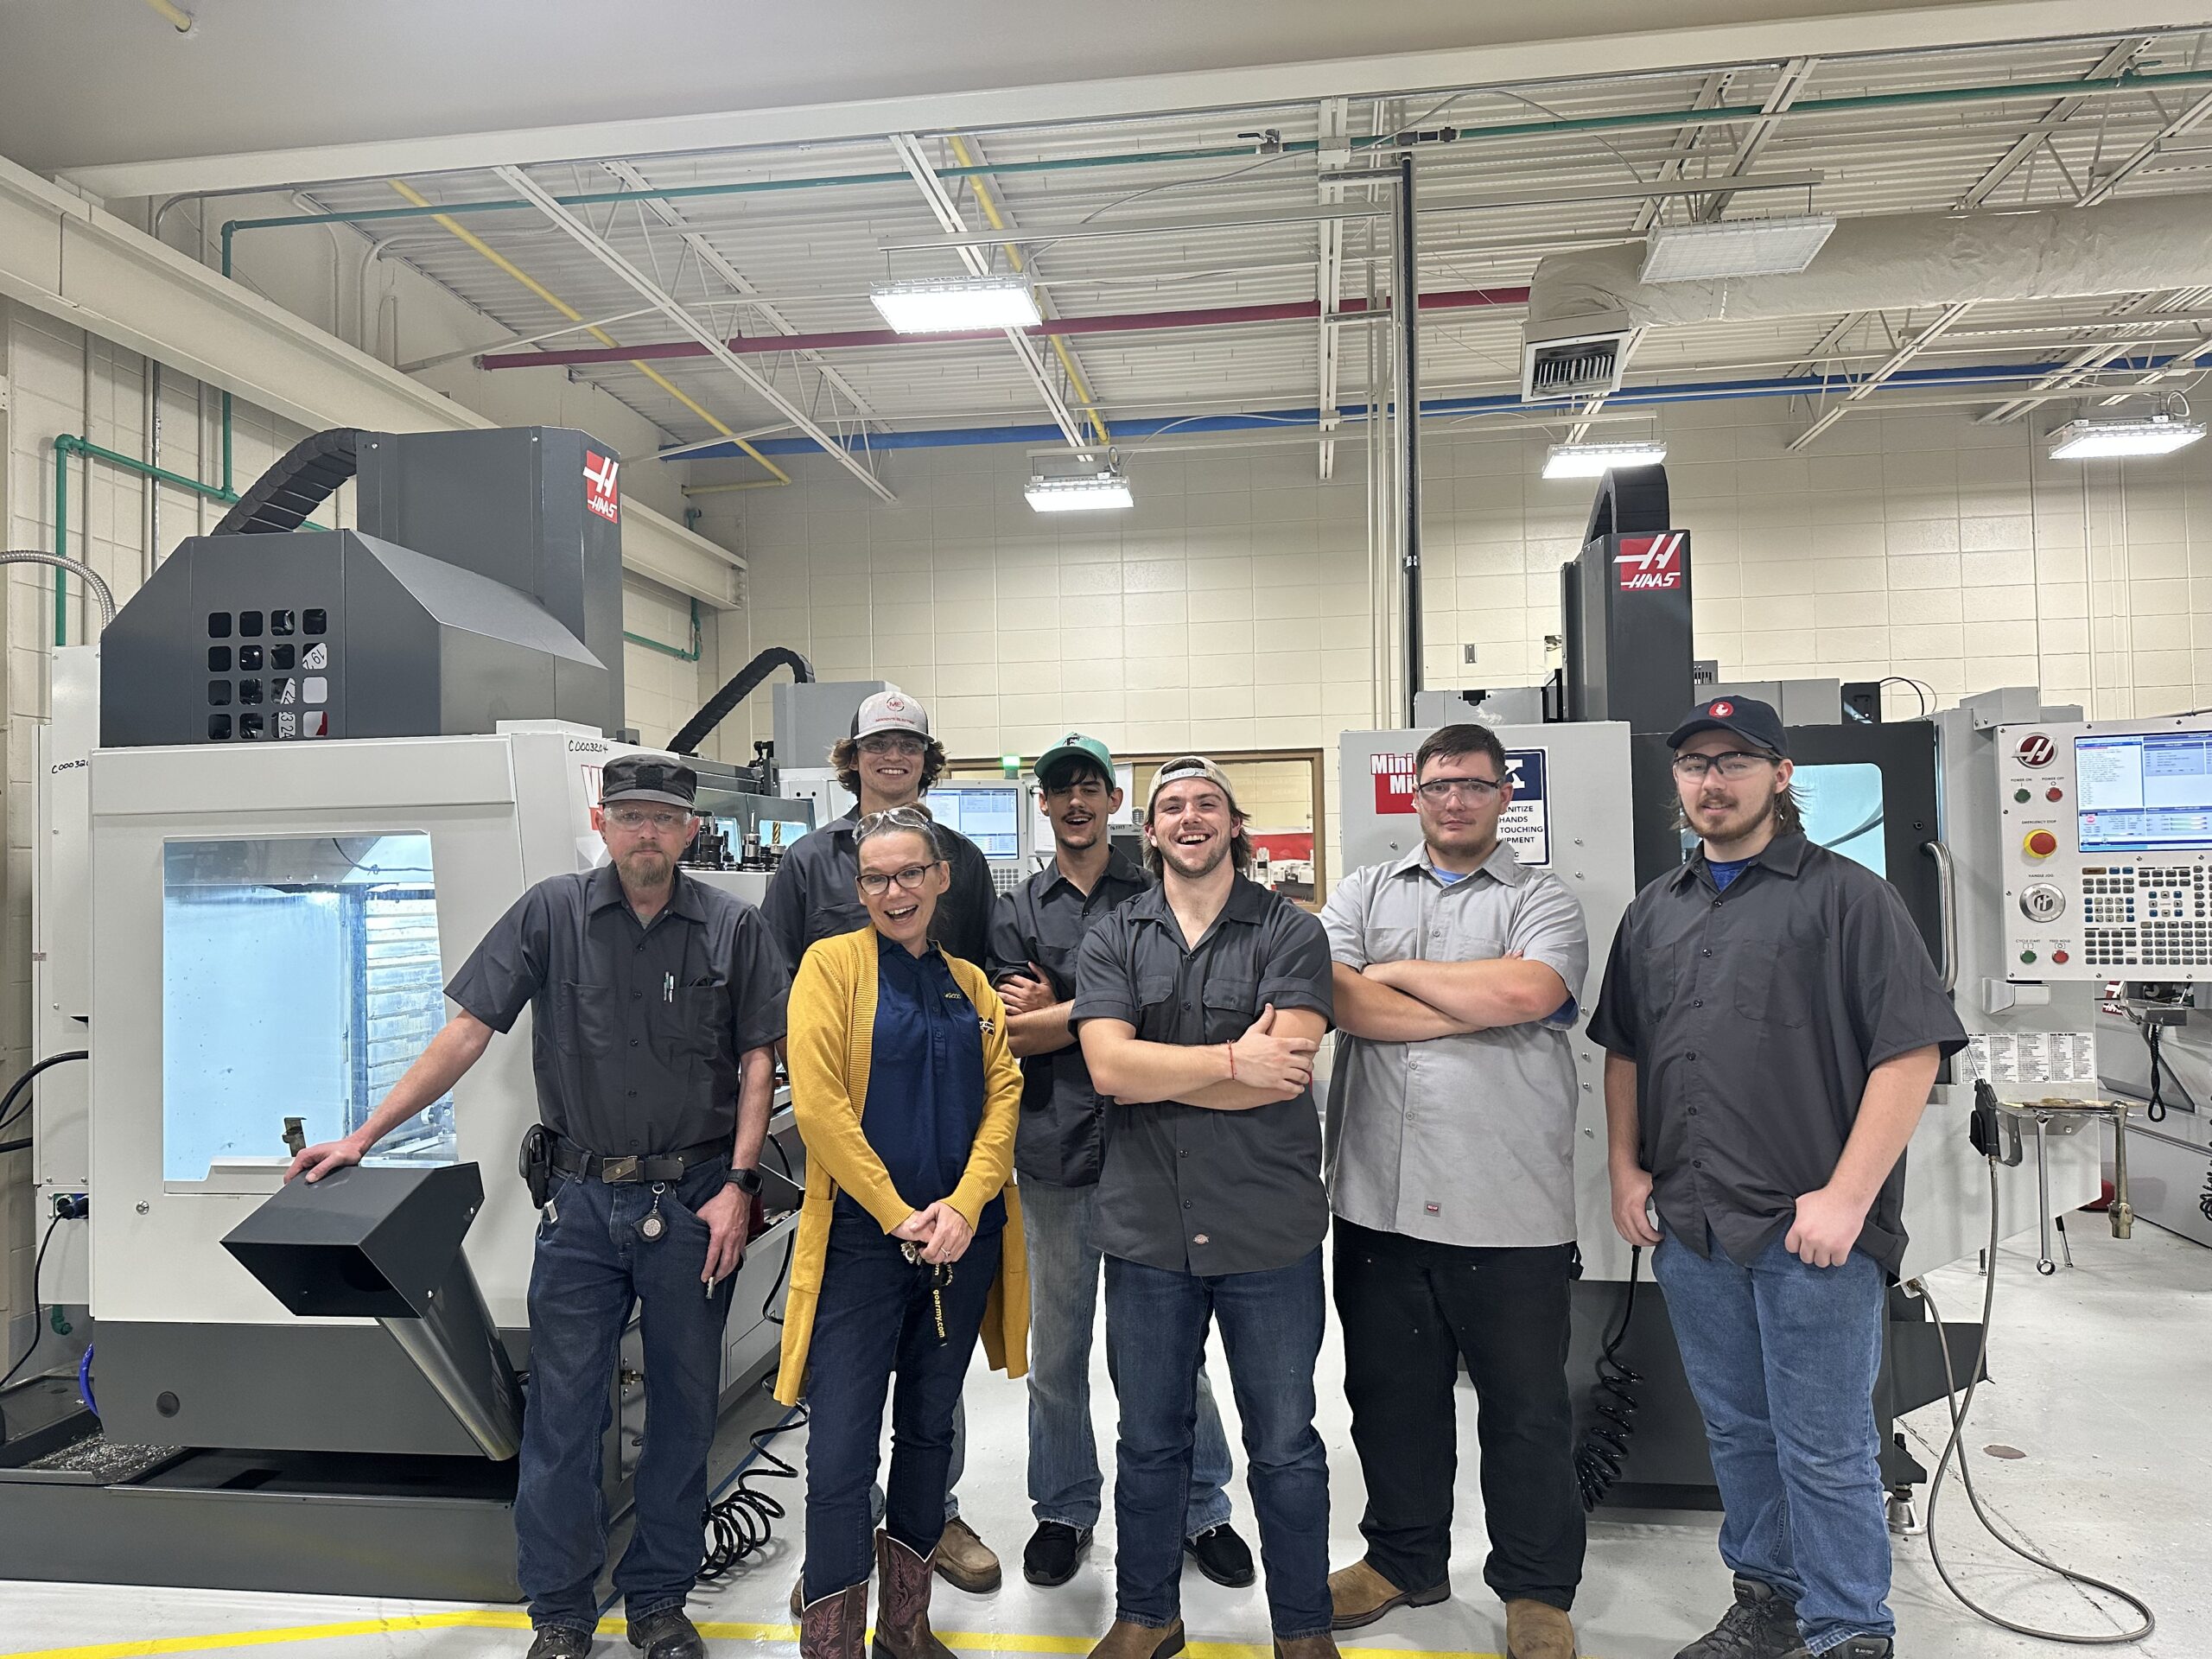 Instructor Jamie Wilkerson, center, with students in the Precision Manufacturing and Machining Technology program at MGCCC’s Jackson County Campus. These students are receiving tuition assistance, help with book costs, and a toolbox with tools as part of a $10,000 scholarship Wilkerson received from the Gene Haas Foundation.